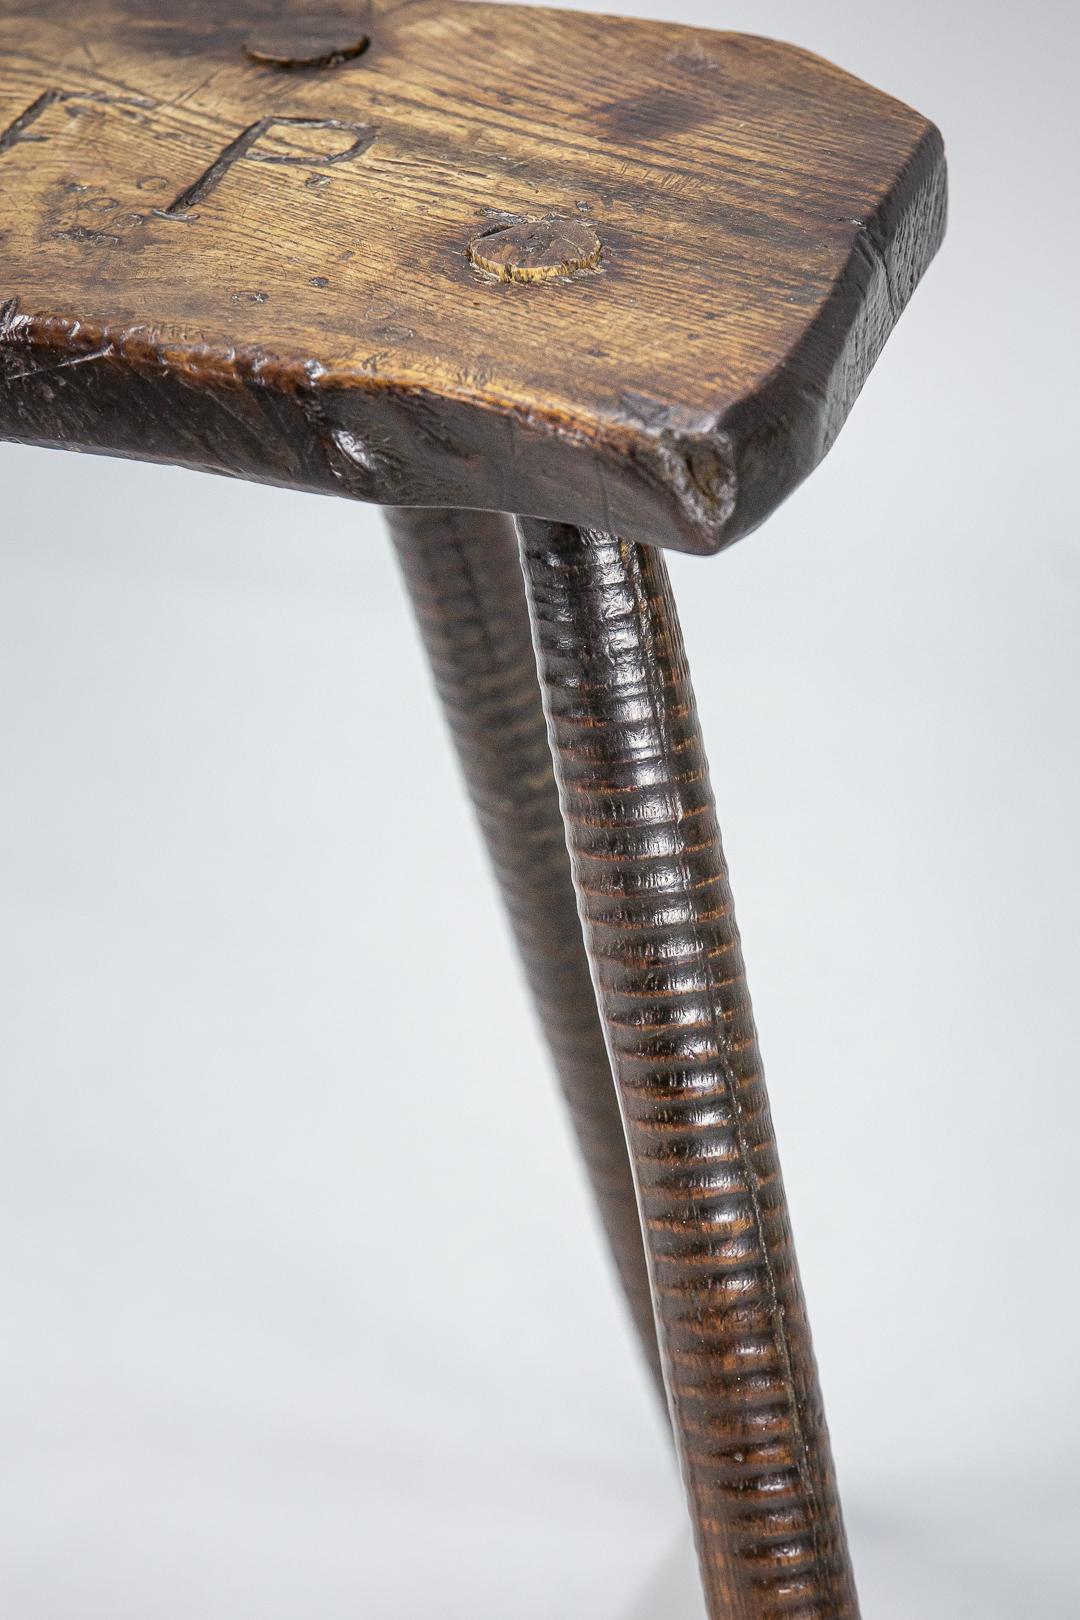 19th Century English Cutlers Stool Initialed 